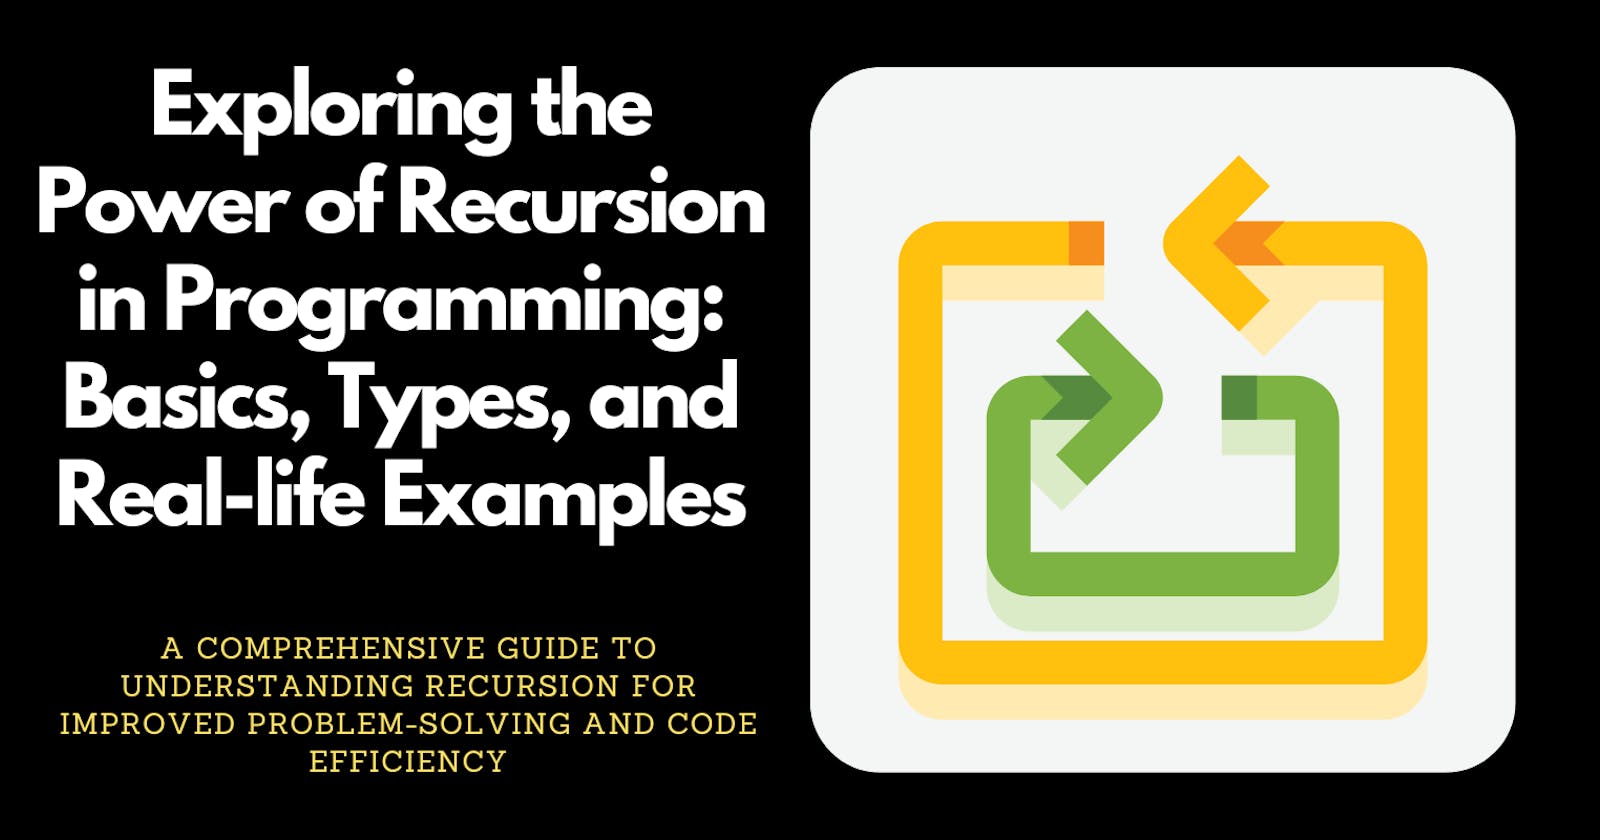 Exploring the Power of Recursion in Programming: Basics, Types, and Real-life Examples